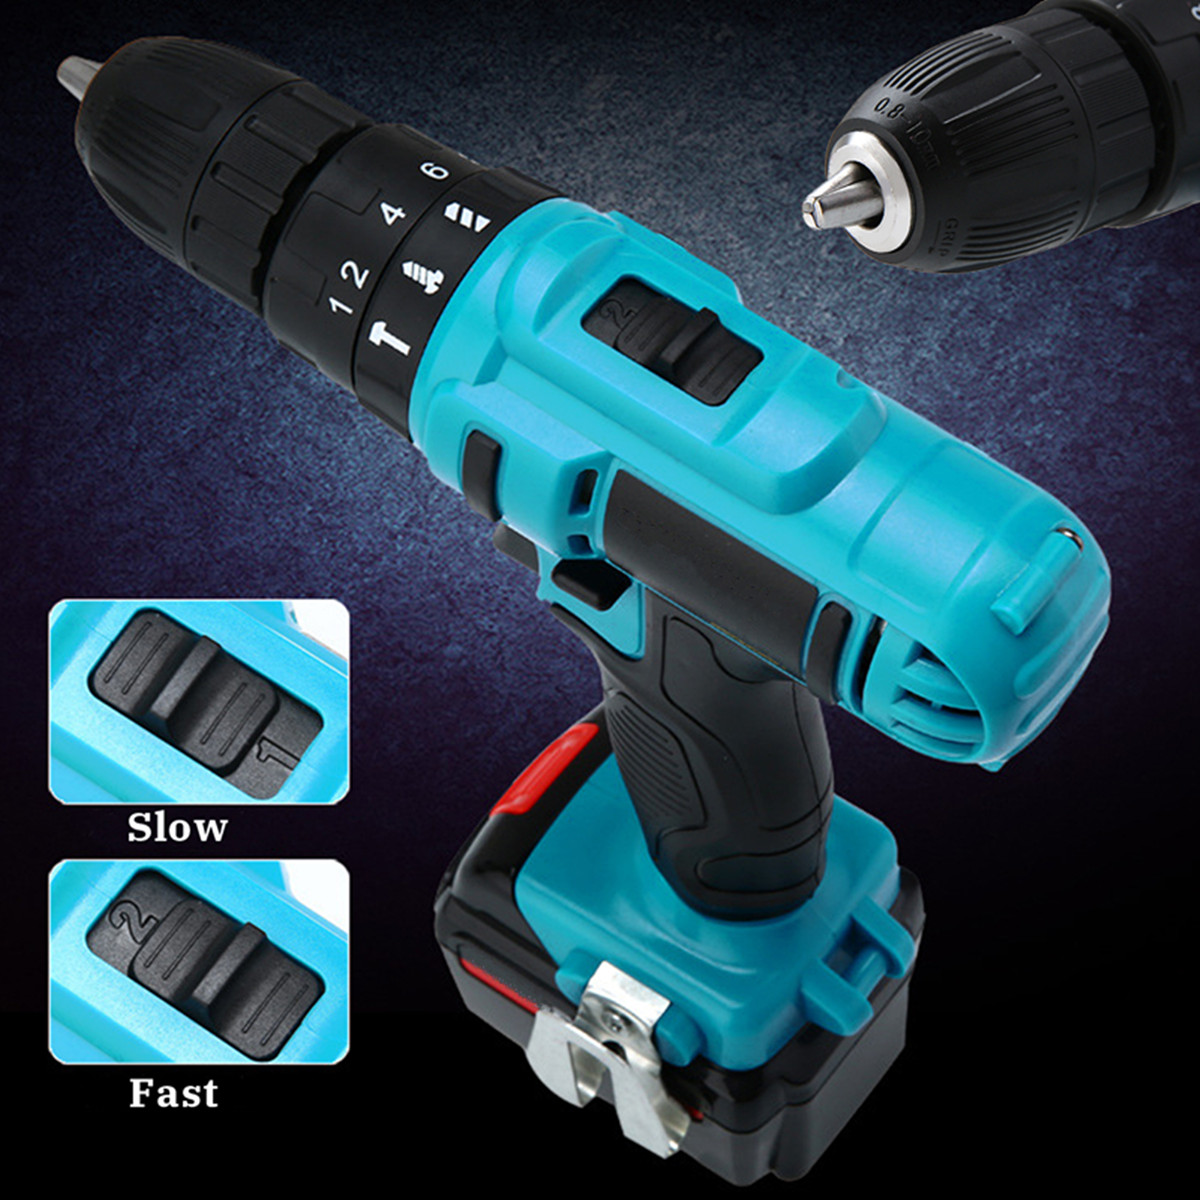 21V-Cordless-Impact-Power-Drill-Electric-Screwdriver-Set-with-2-Li-ion-Batteries-1372018-6